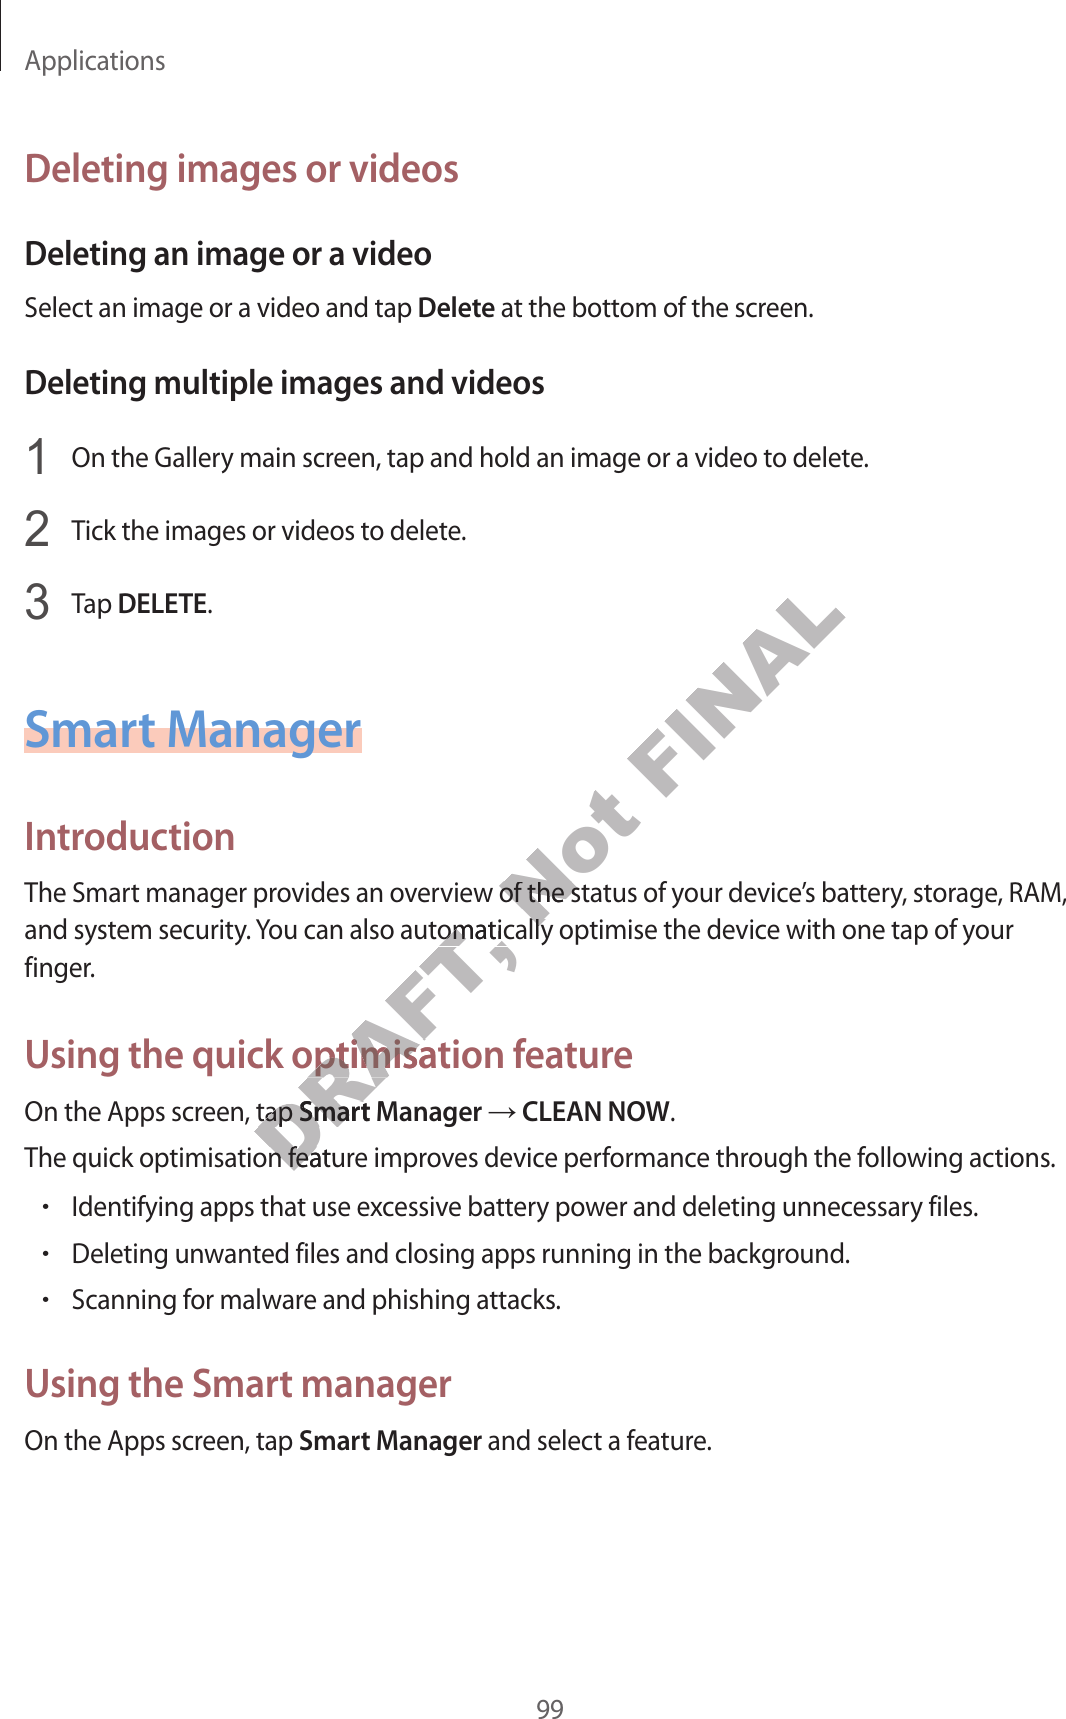 Applications99Deleting images or videosDeleting an image or a videoSelect an image or a video and tap Delete at the bottom of the screen.Deleting multiple images and videos1  On the Gallery main screen, tap and hold an image or a video to delete.2  Tick the images or videos to delete.3  Tap DELETE.Smart ManagerIntroductionThe Smart manager provides an overview of the status of your device’s battery, storage, RAM, and system security. You can also automatically optimise the device with one tap of your finger.Using the quick optimisation featureOn the Apps screen, tap Smart Manager ĺ CLEAN NOW.The quick optimisation feature improves device performance through the following actions.•Identifying apps that use excessive battery power and deleting unnecessary files.•Deleting unwanted files and closing apps running in the background.•Scanning for malware and phishing attacks.Using the Smart managerOn the Apps screen, tap Smart Manager and select a feature.DRAFT, view of the staou can also automatically optimise the devicou can also automatically optimise the devicsing the quick optimisation fsing the quick optimisaeen, tap een, tap DRAFT, Smart MSmart Mtion featurtion feaNot view of the staview of the statically optimise the devictically optimise the devicFINAL